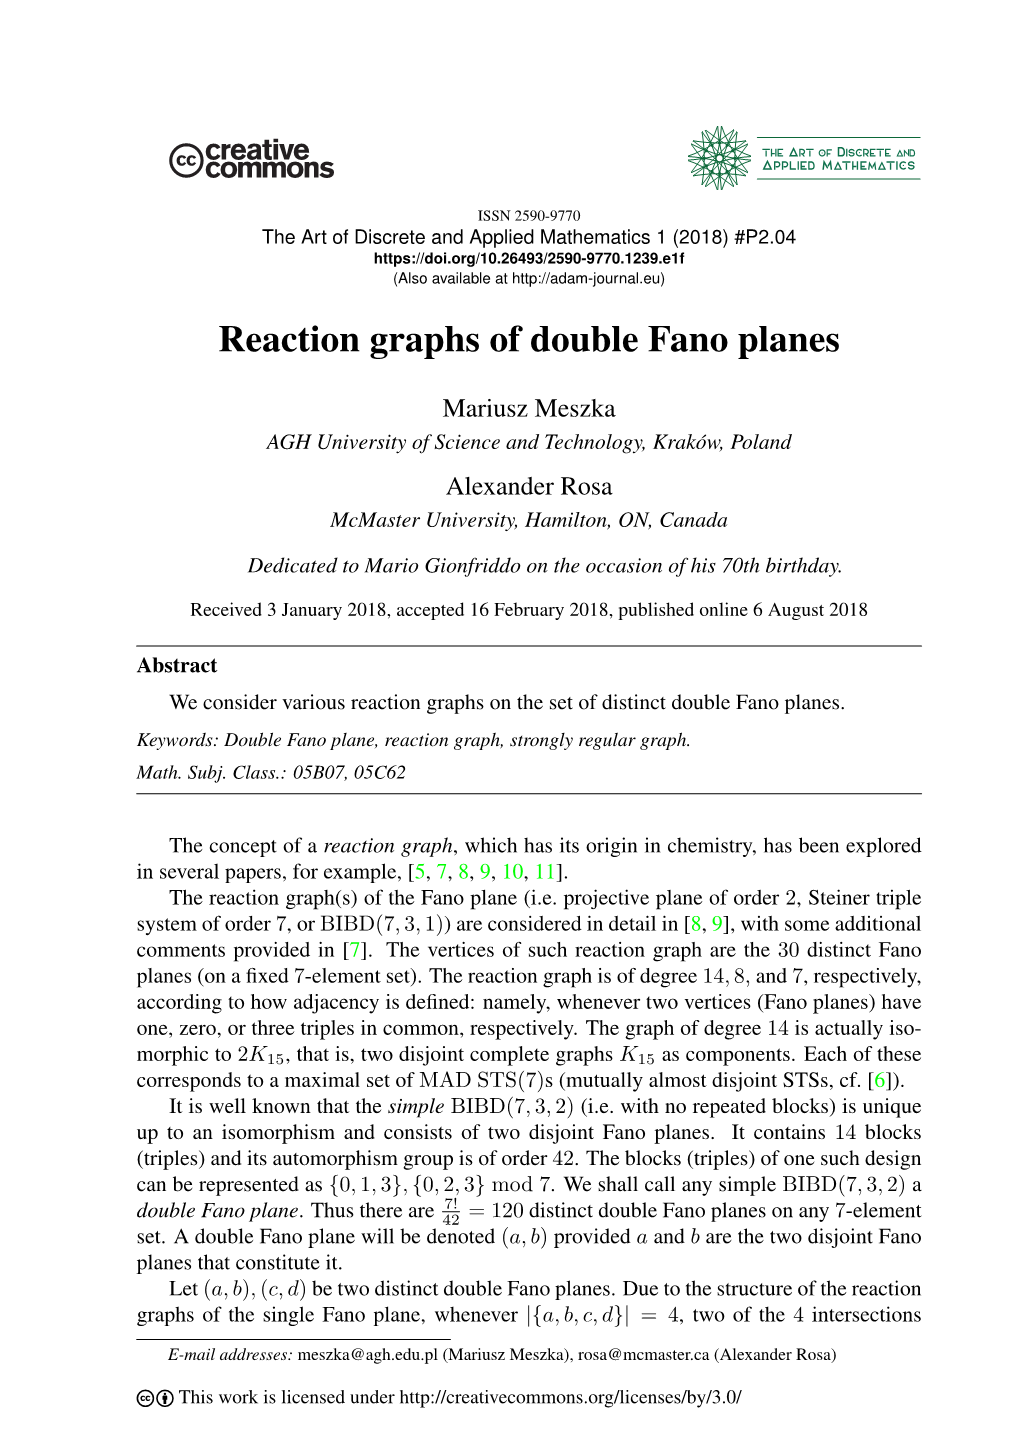 Reaction Graphs of Double Fano Planes